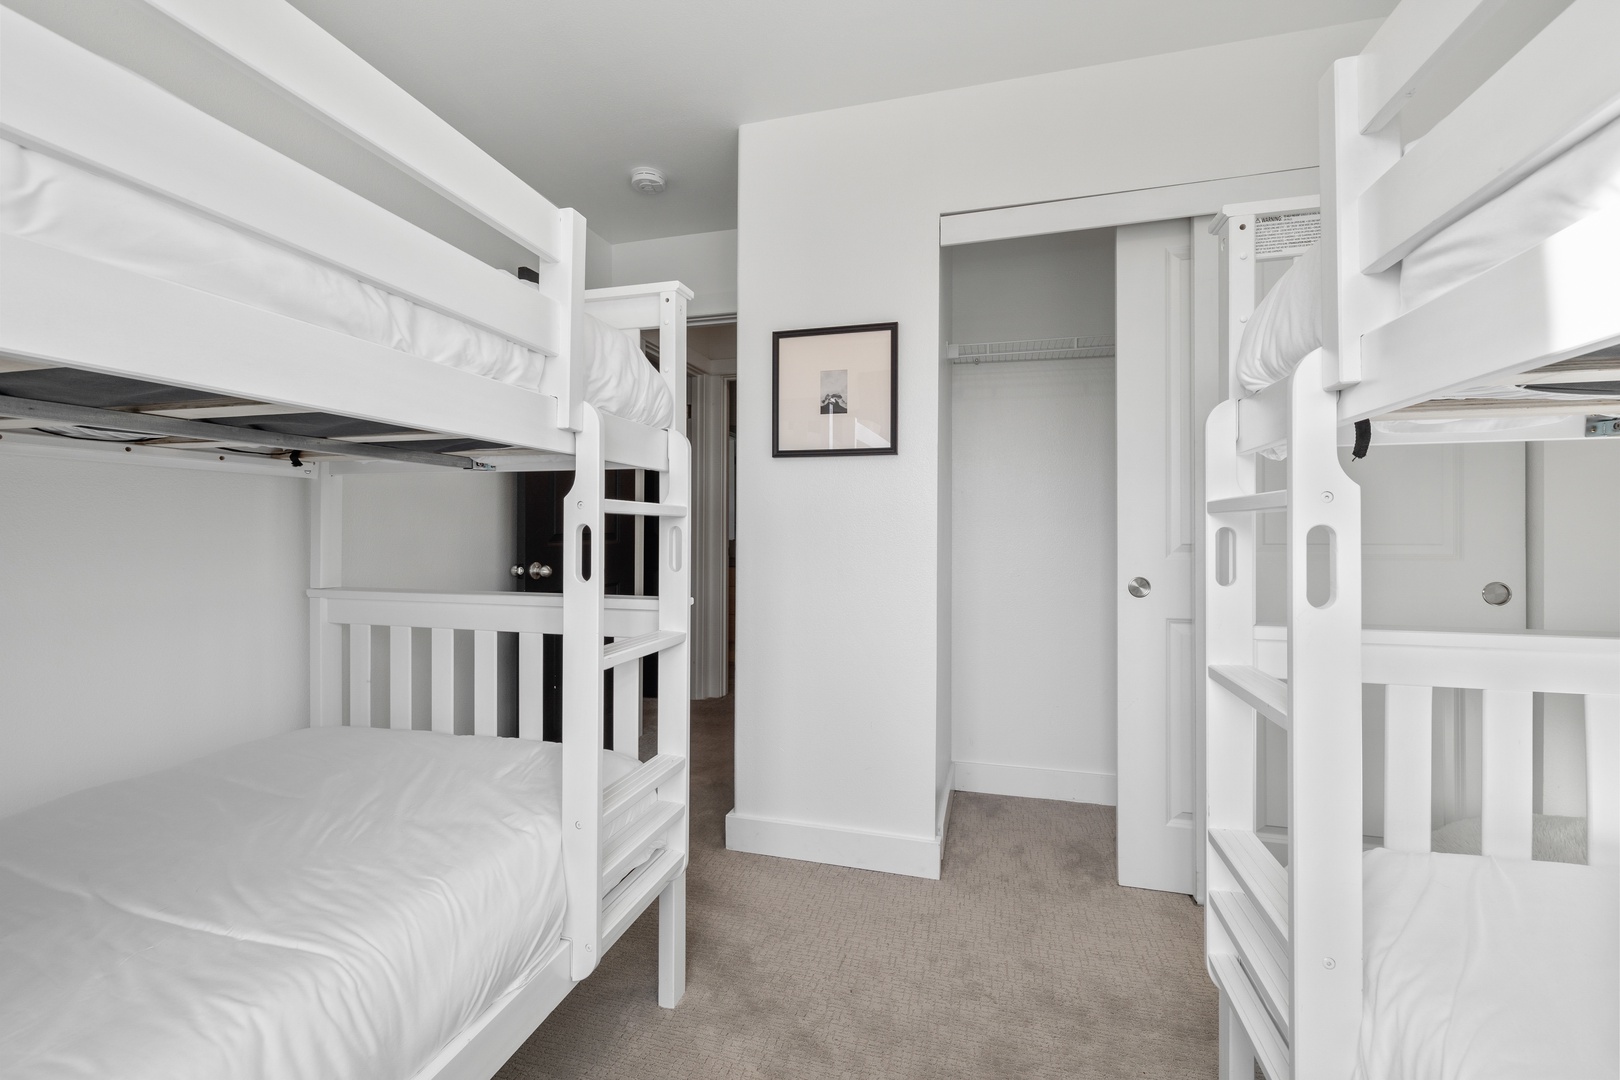 The final 2nd floor bedroom includes two twin-over-twin bunkbeds